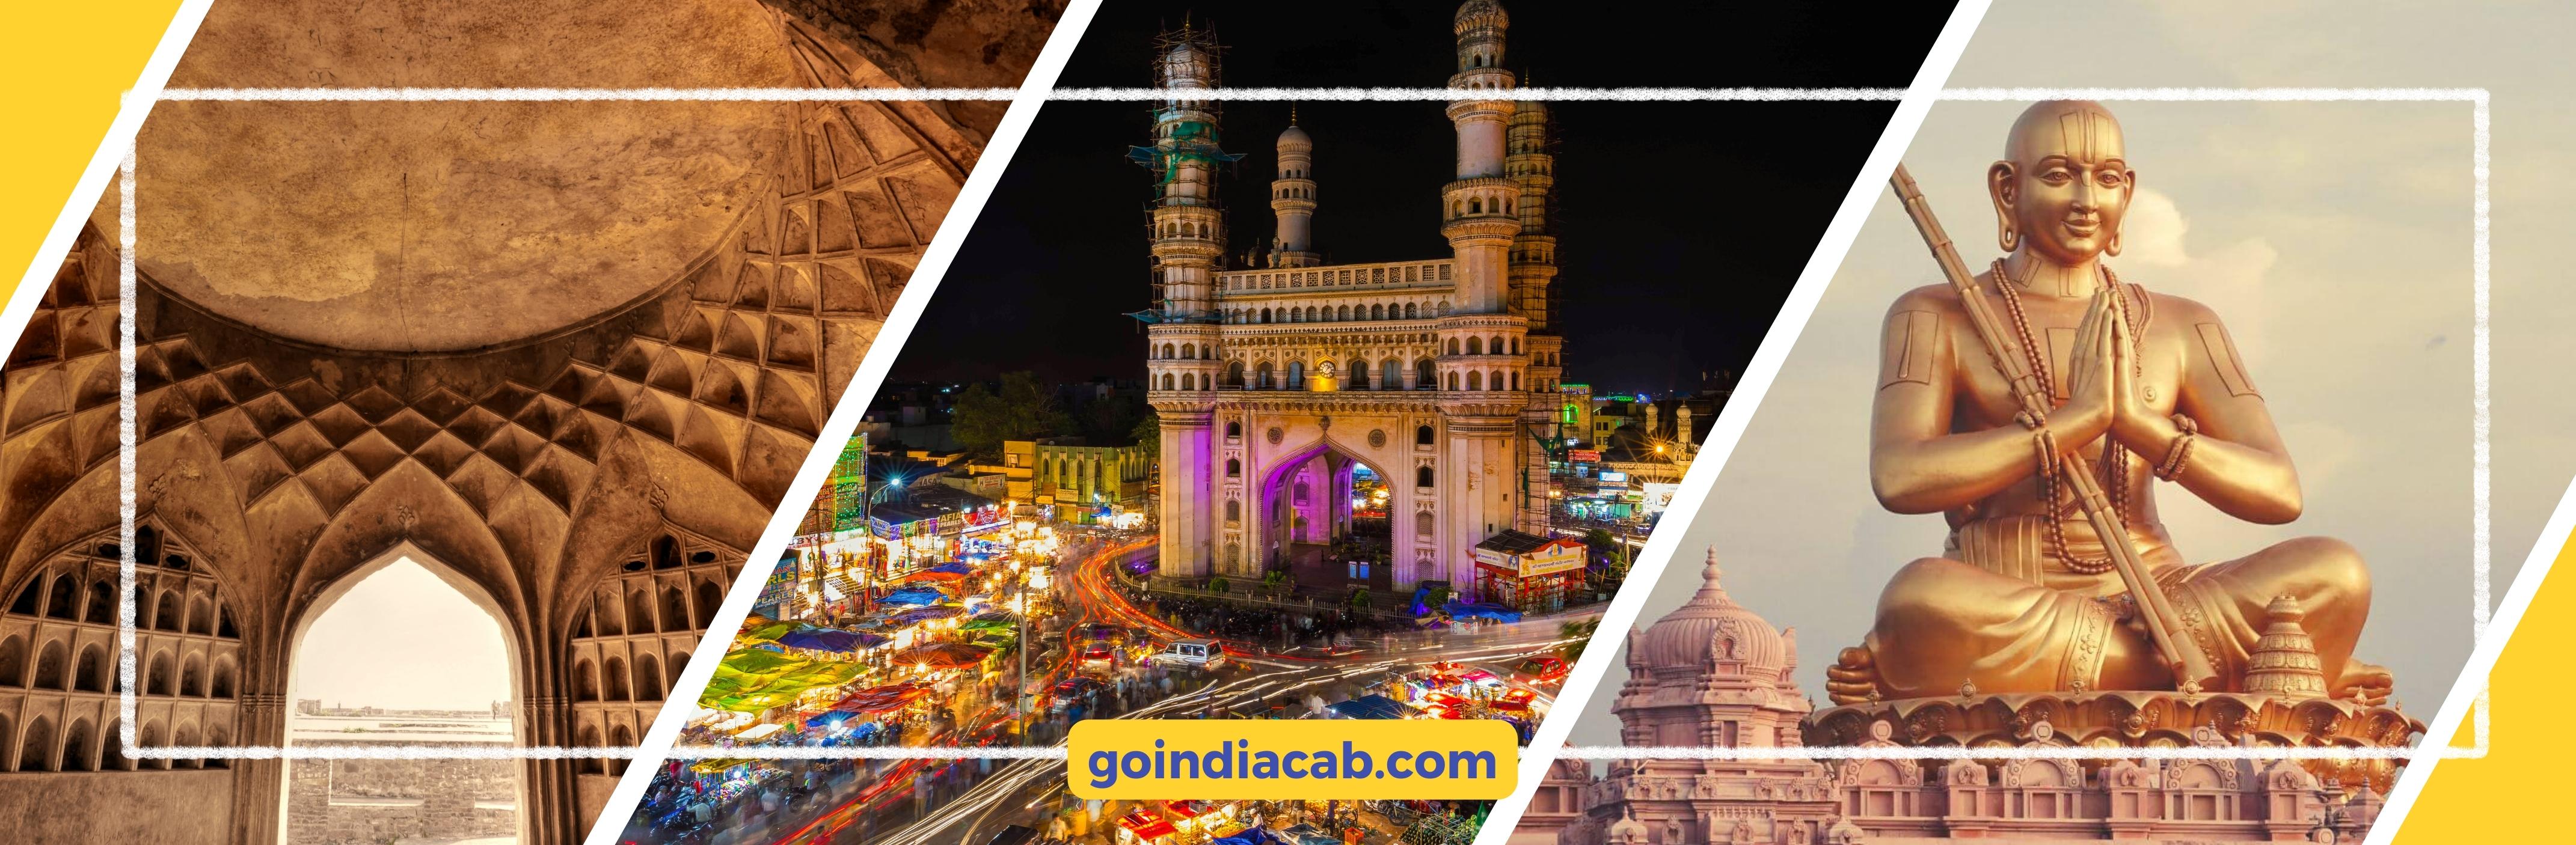 Background Image in hyderabad goindiacab